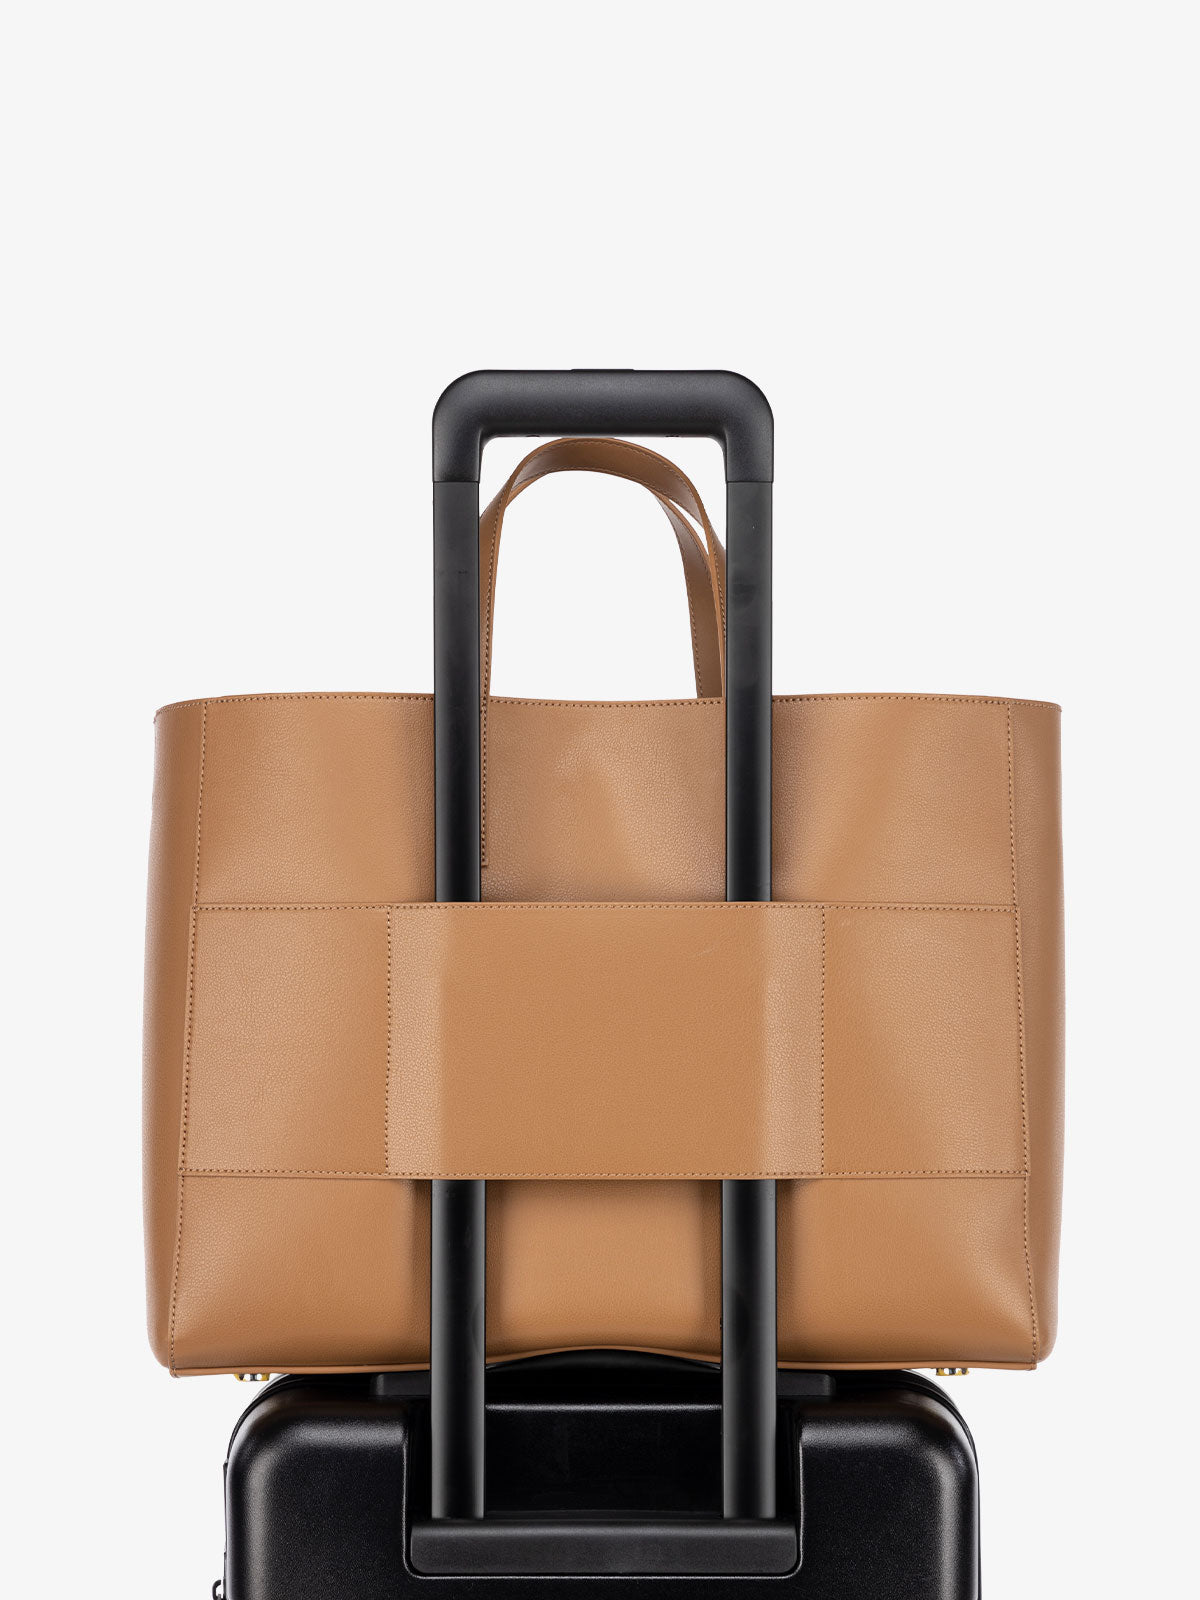 Leather Tote With Trolley Sleeve Leather Bag With Luggage 